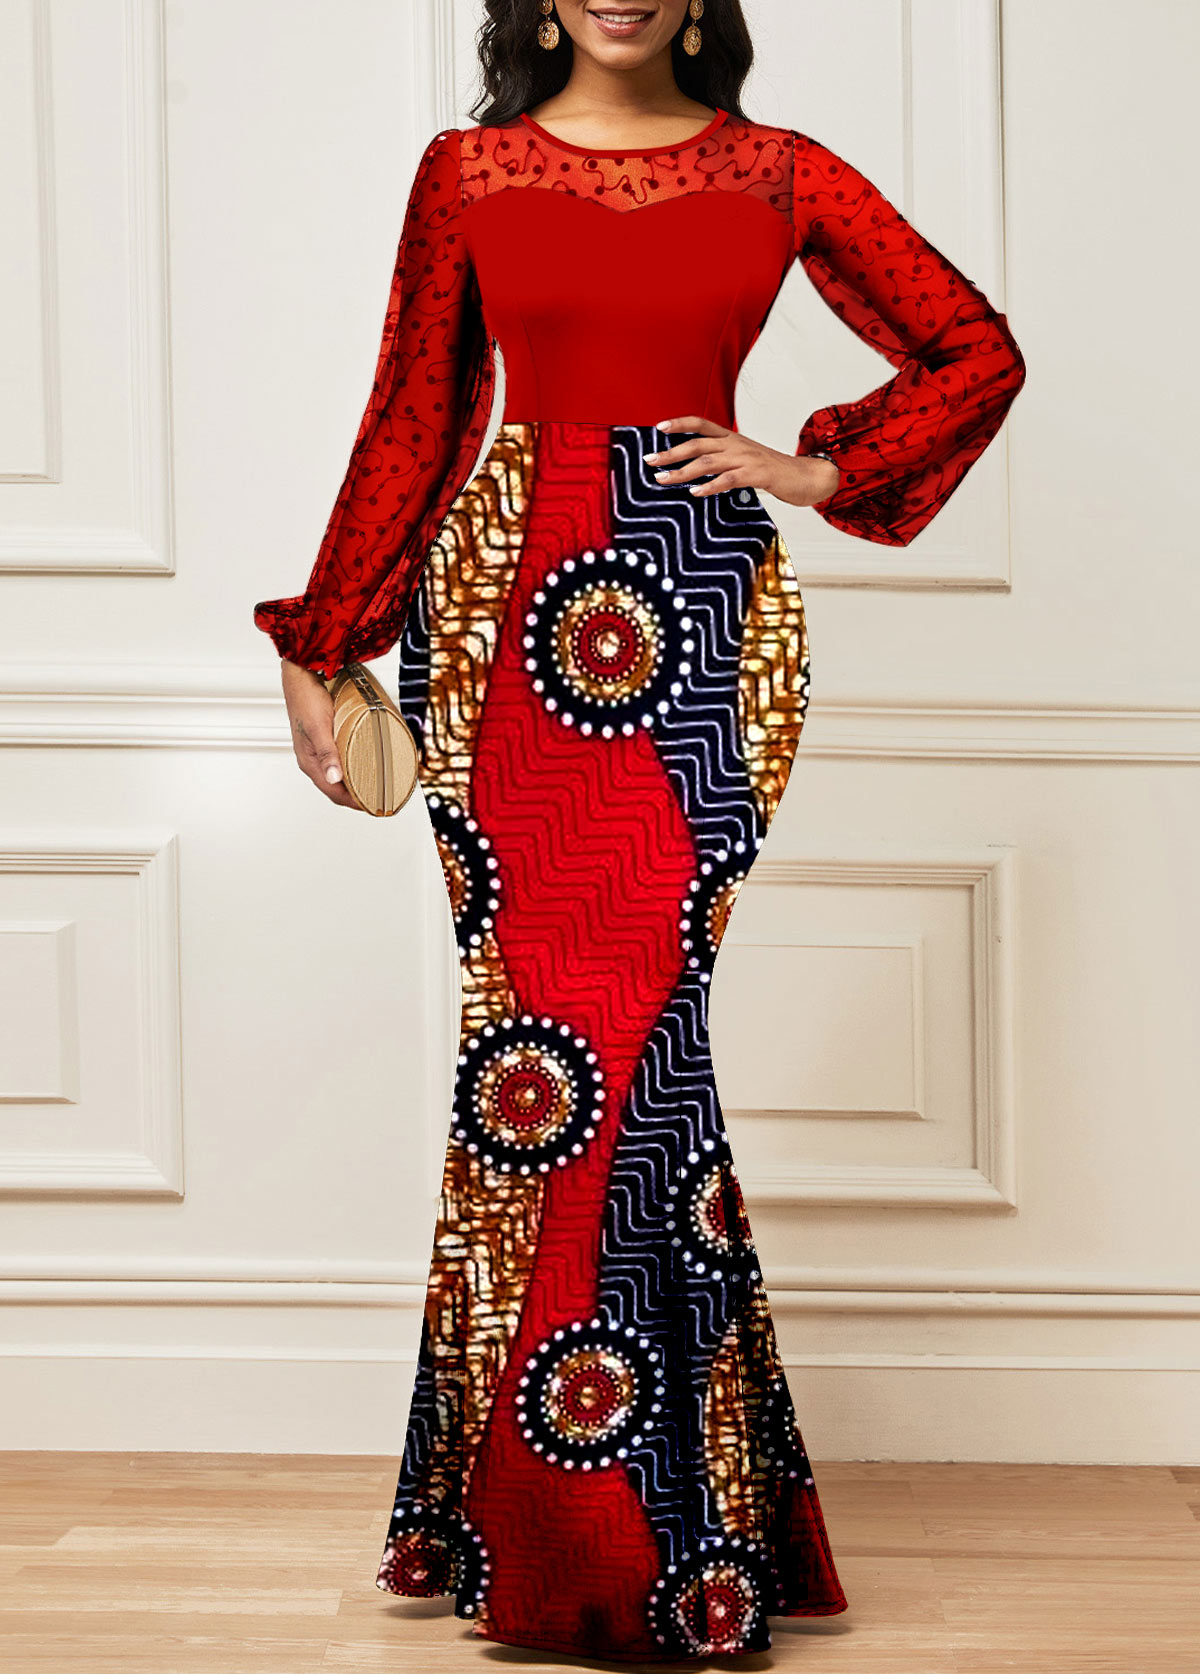 Red Lace Tribal Print Long Sleeve Maxi Bodycon Dress